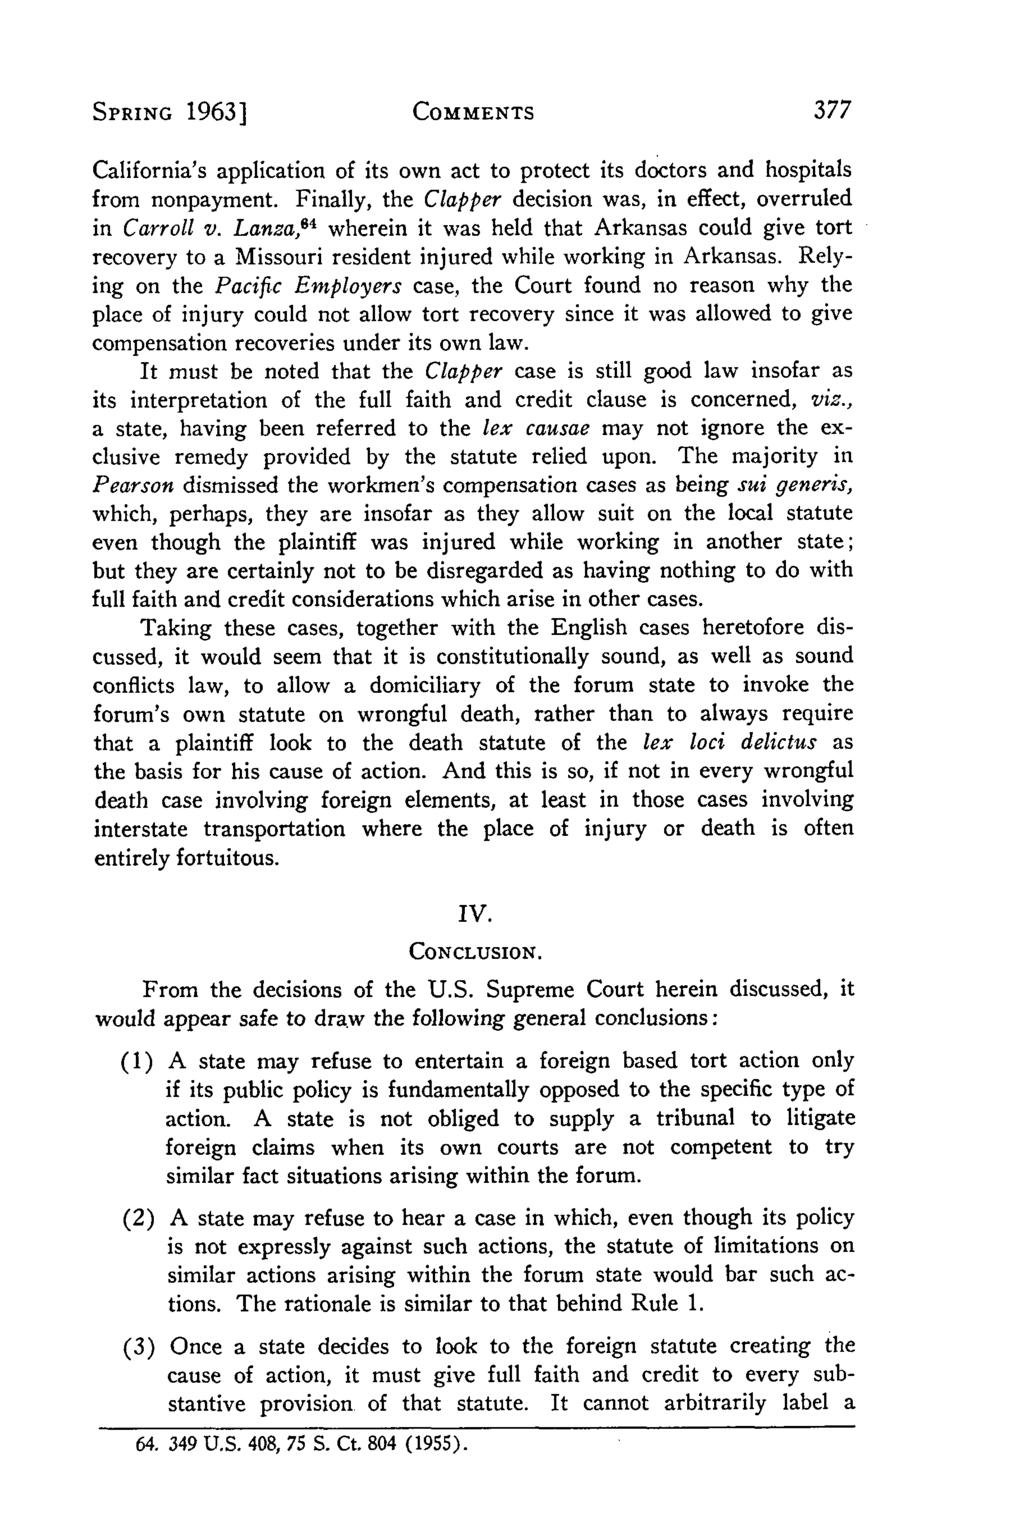 Villanova Law Review, Vol. 8, Iss. 3 [1963], Art. 3 SPRING 1963] COMMENTS California's application of its own act to protect its doctors and hospitals from nonpayment.